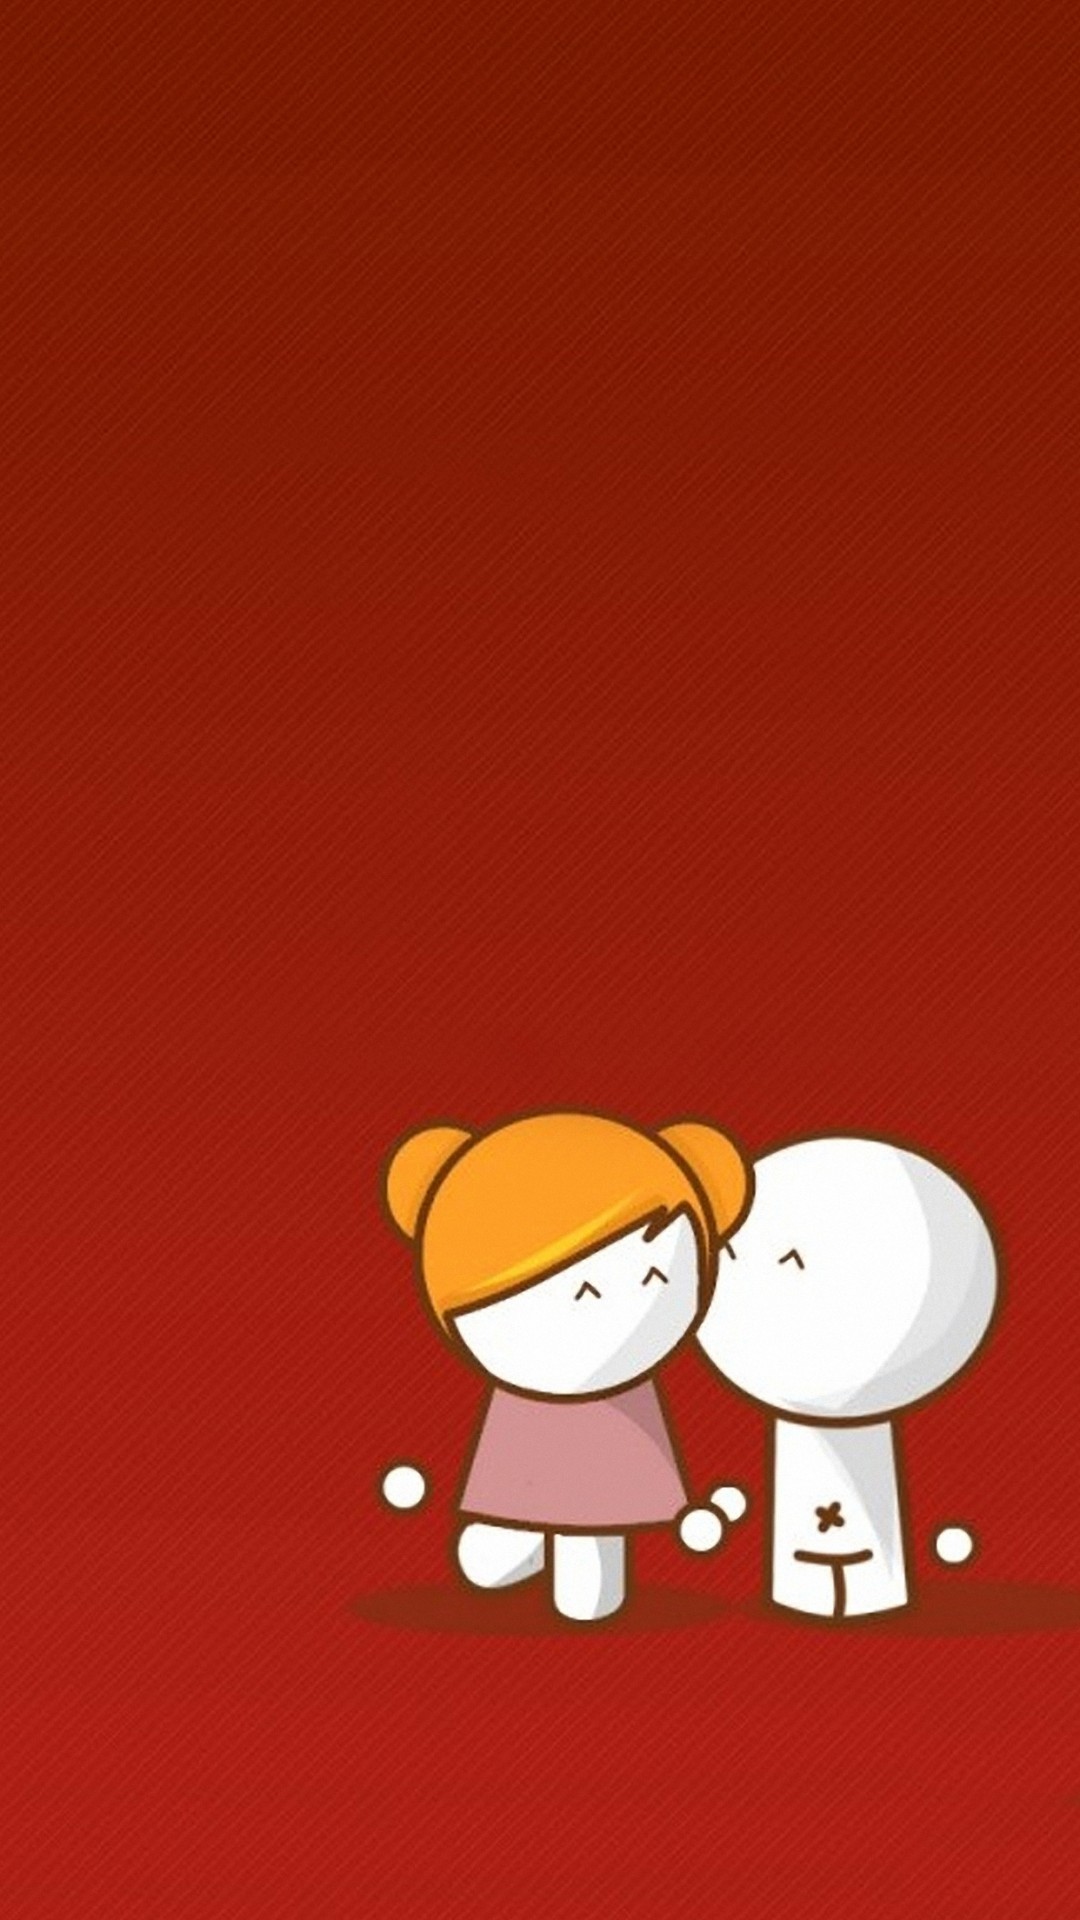 1080x1920 wallpaper.wiki-HD-Cartoon-iPhone-Backgrounds-PIC-WPC003610